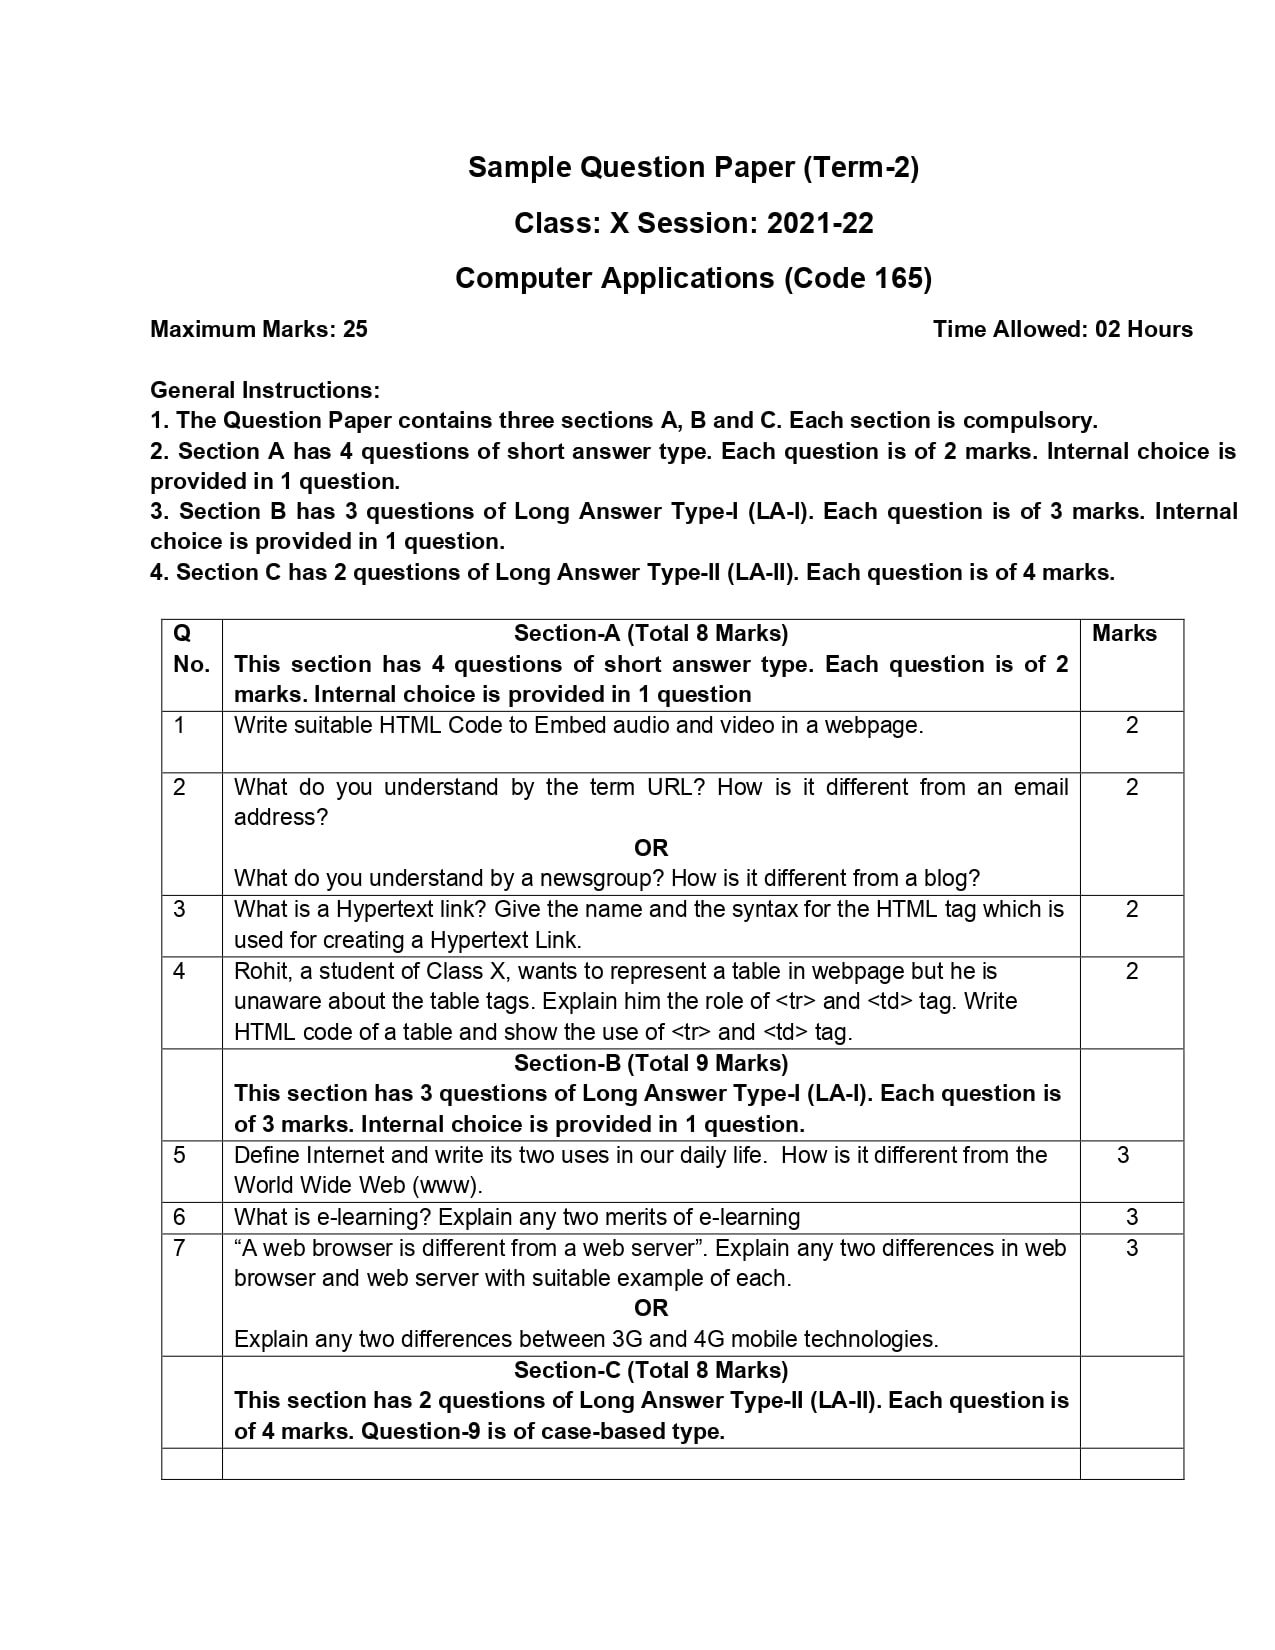 Cbse Class 10 Computer Application Term 2 Sample Paper With Answers